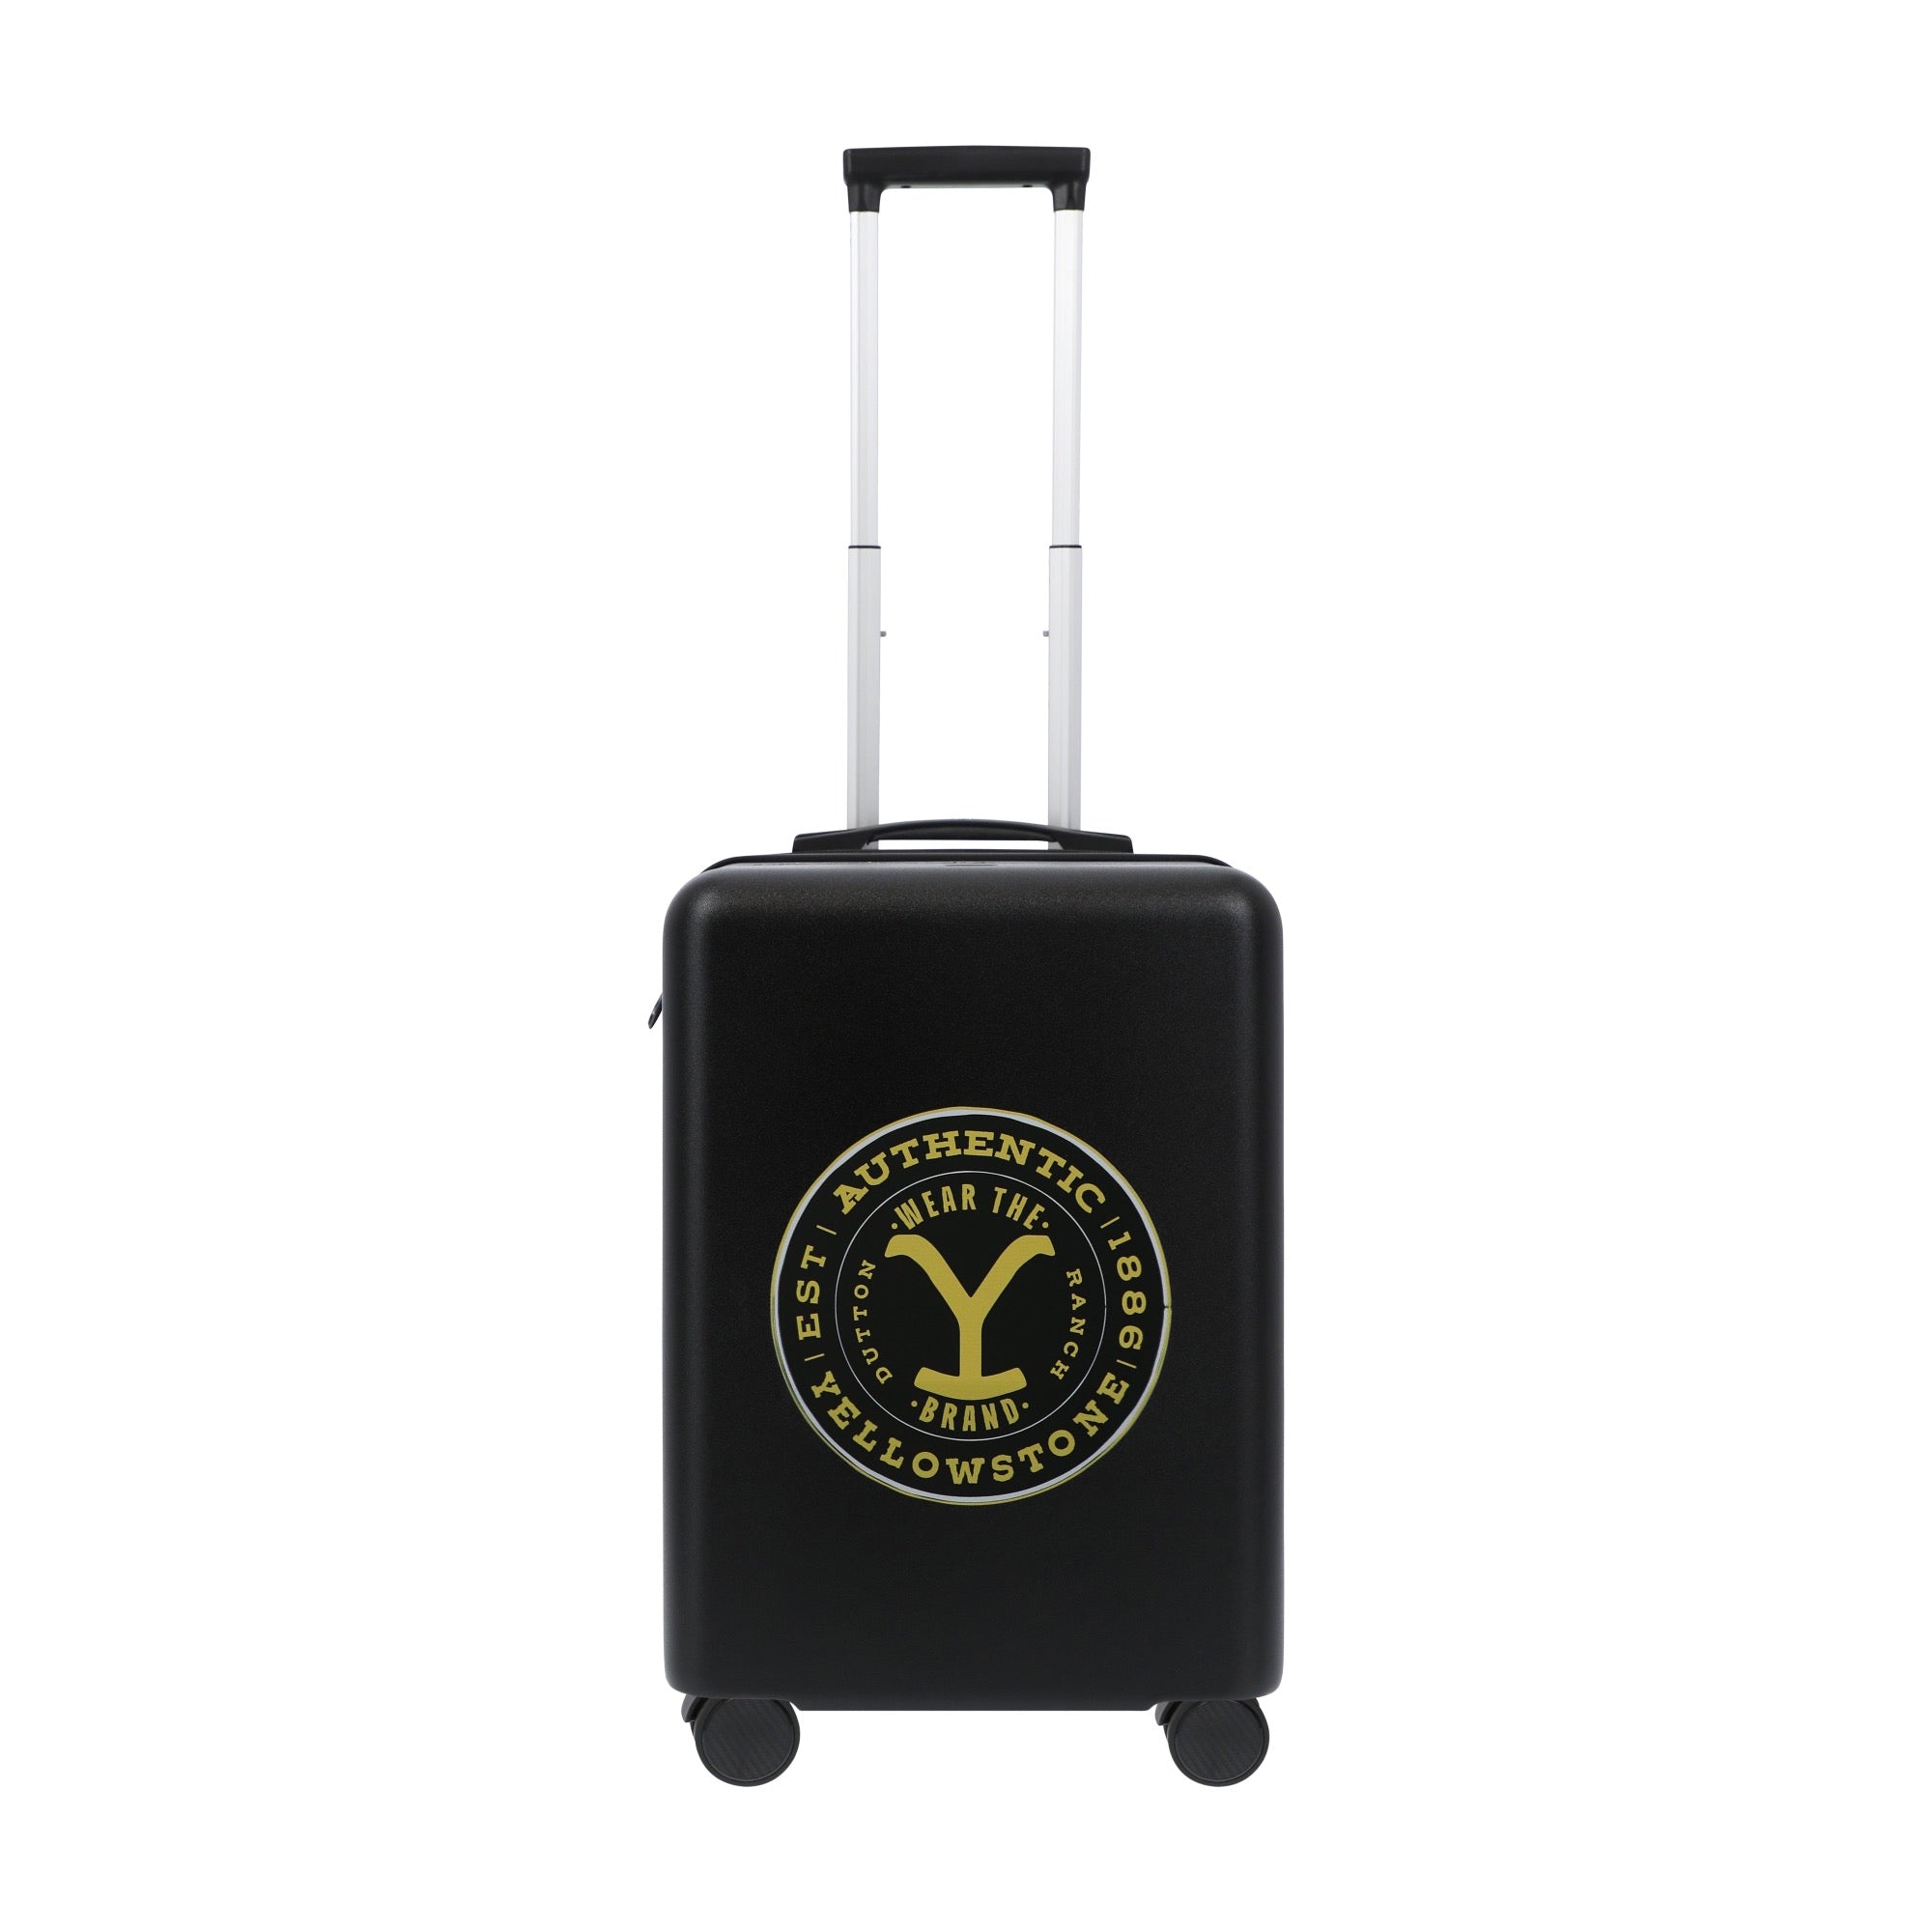 Black paramount yellowstone 22.5" carry-on spinner suitcase luggage by Ful